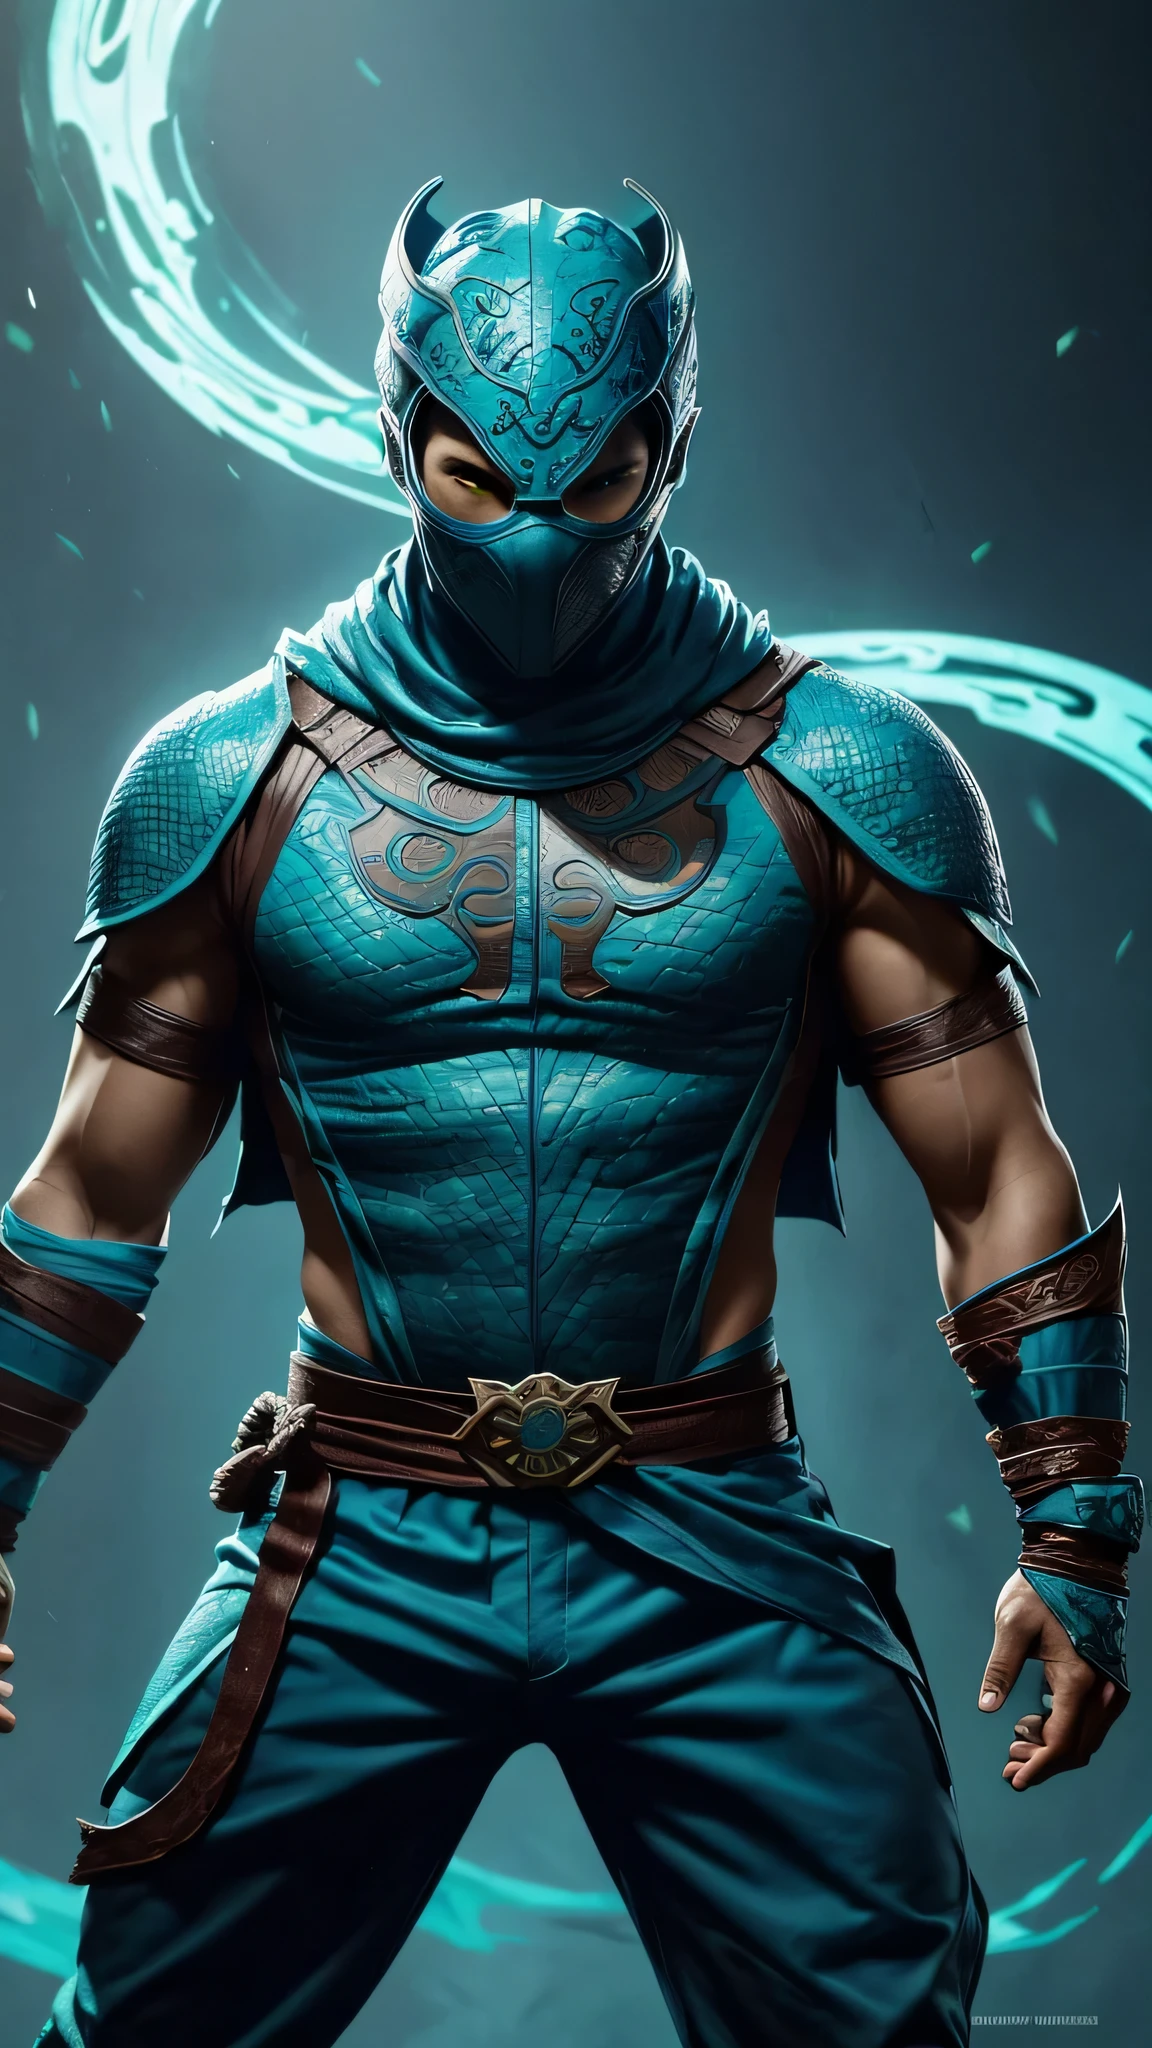 ((Daniel Wu)) as Chameleon from Mortal Kombat, (1boy), fighting standing, turquoise ninja outfit, (with reptilian motifs), (ninja mask covering his lower face), intricate, high detail, sharp focus, dramatic, photorealistic painting art by greg rutkowski